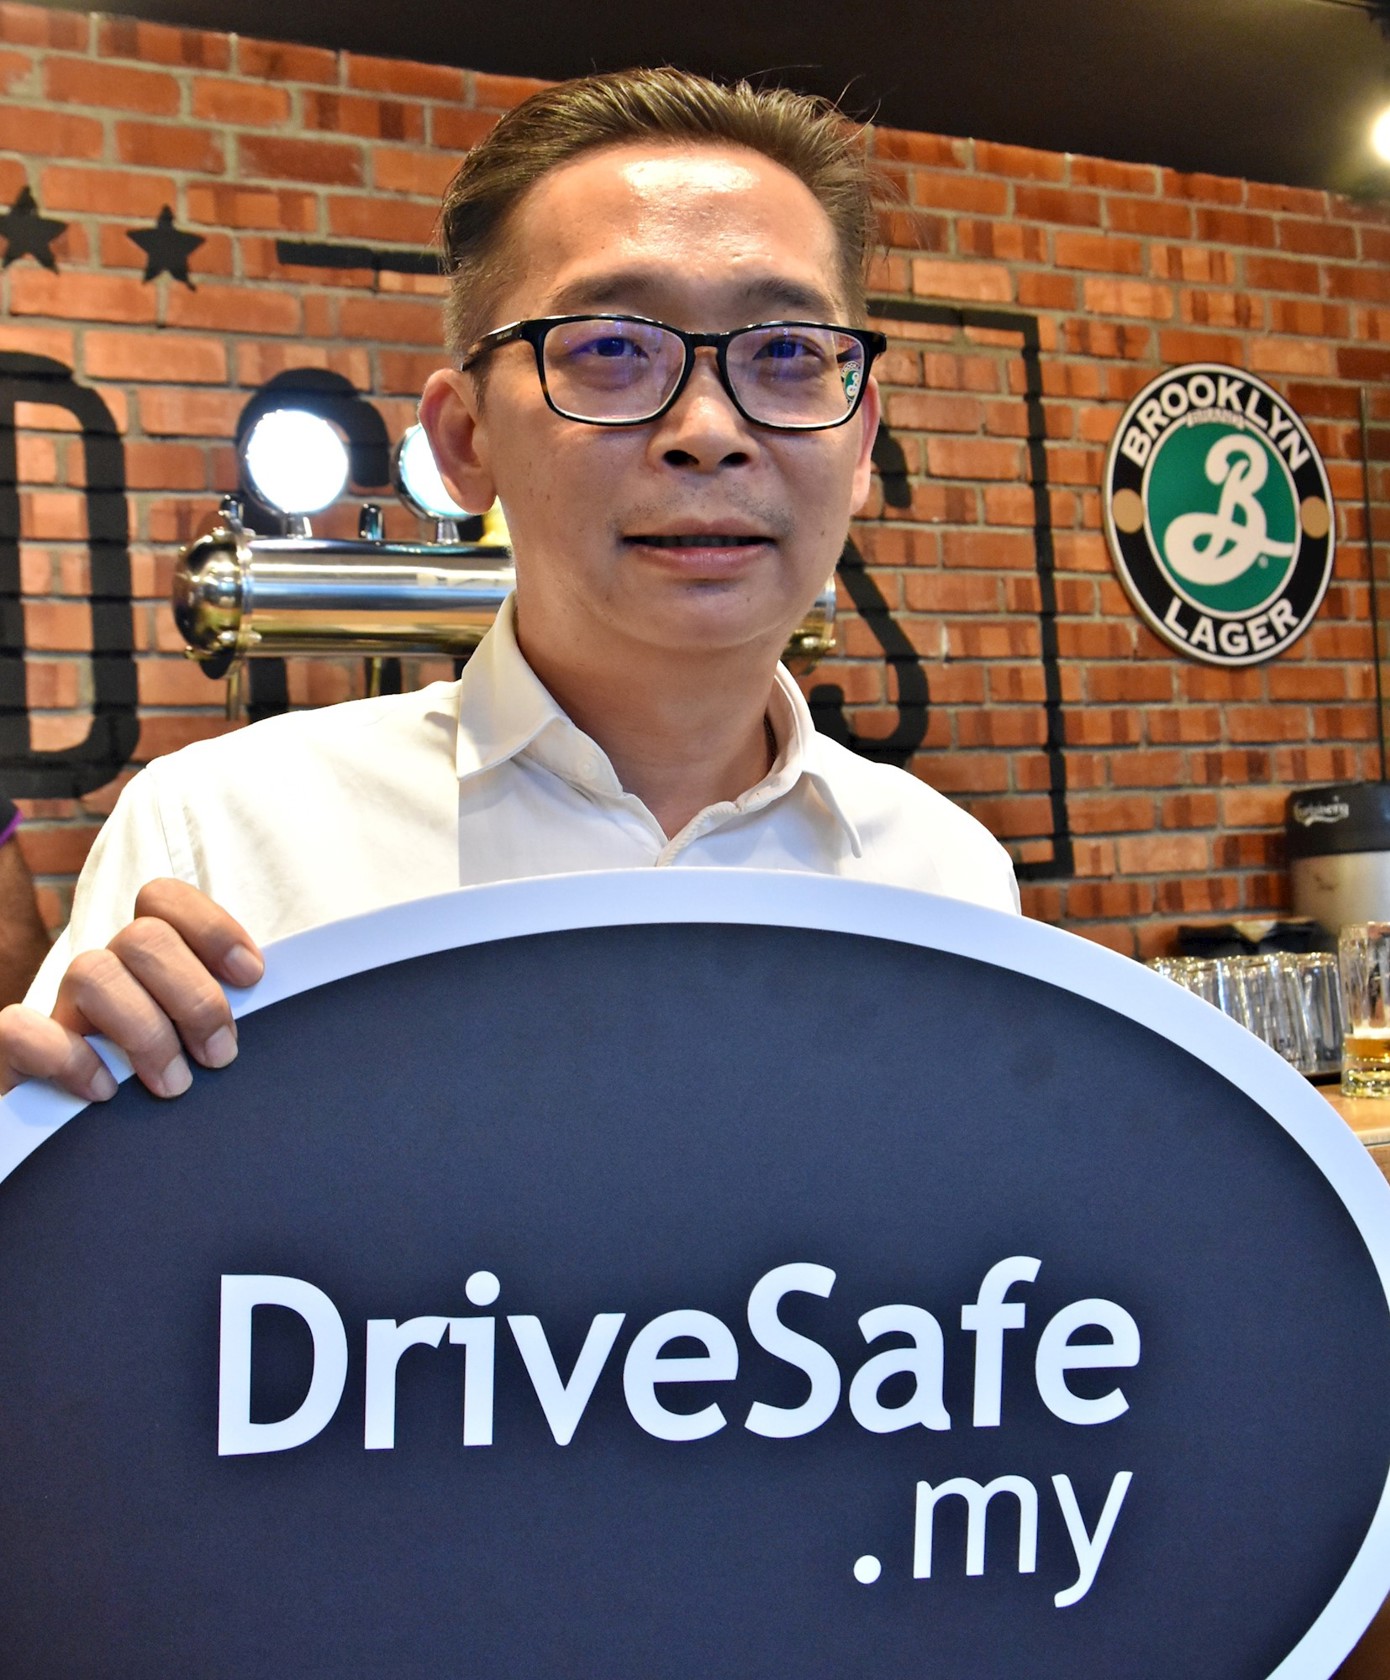 “DriveSafe is a young company but with big plans for improved user experience and bigger service coverage. With experienced drivers and a user-friendly app, anyone will be able to celebrate responsibly and we thank Carlsberg Malaysia for having us in this campaign.” John So, co-founder of DriveSafe